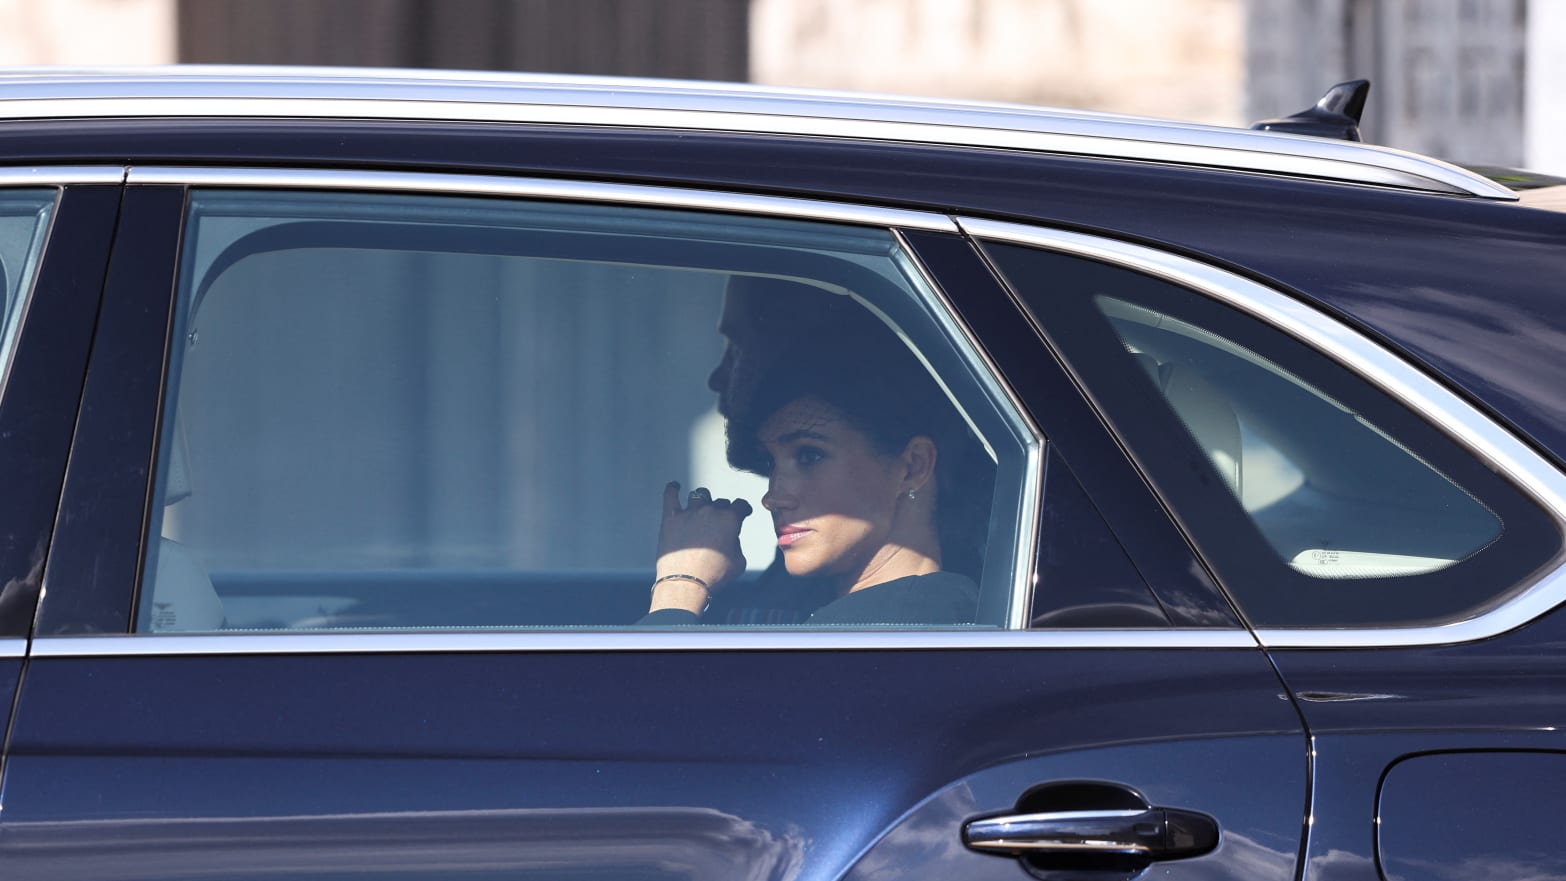 Prince Harry, Duke of Sussex and Meghan, Duchess of Sussex depart in a car after the procession for the Lying-in State of Queen Elizabeth II on September 14, 2022.